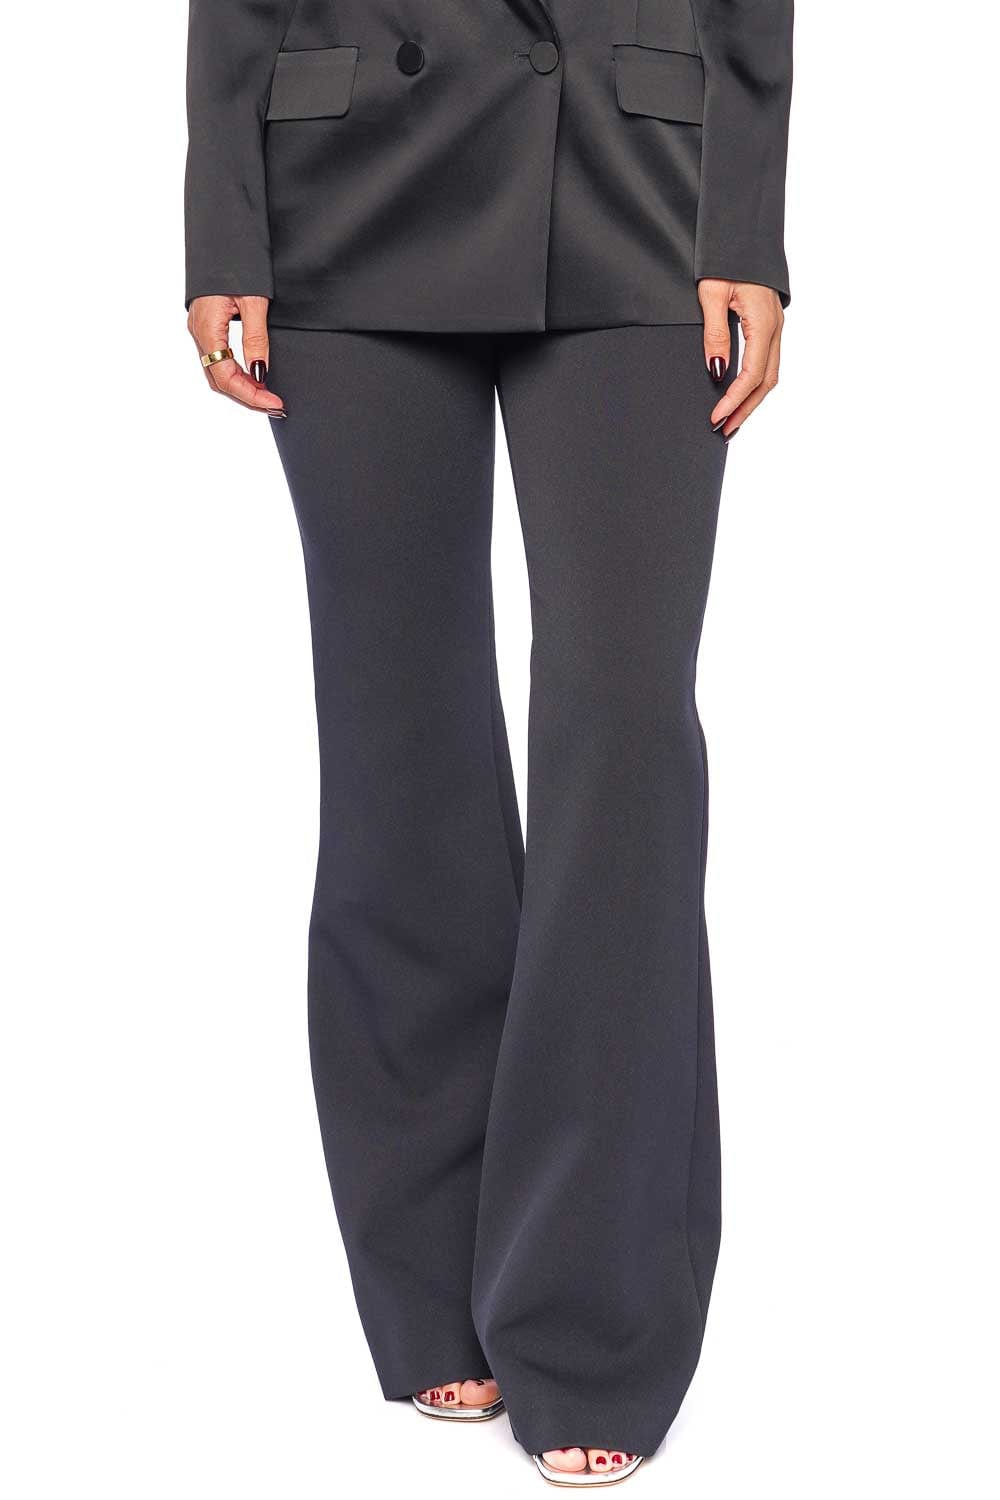 Kenna Black Tailored Trousers